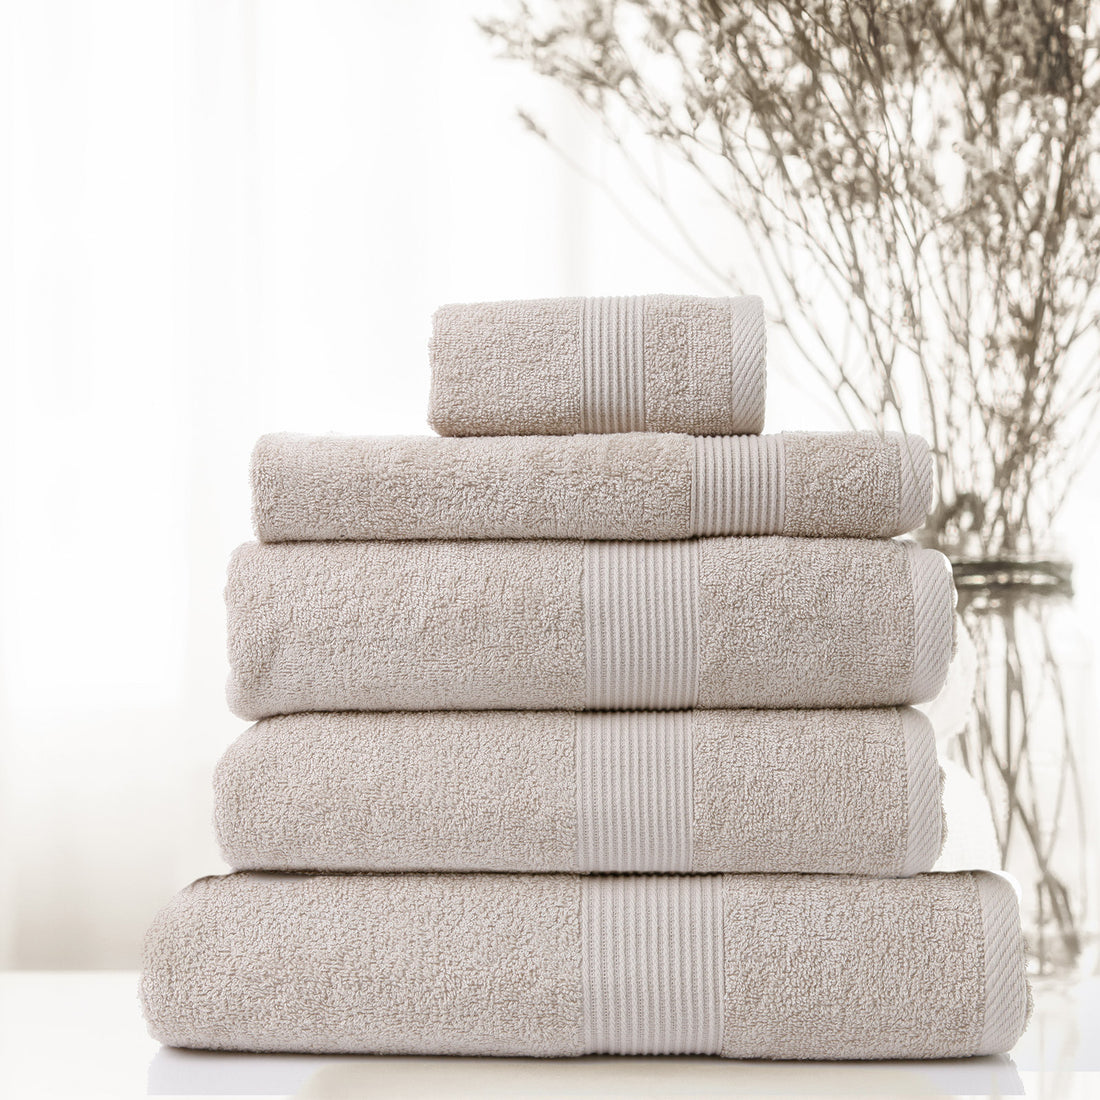 Royal Comfort 5 Piece Cotton Bamboo Towel Set 450GSM Luxurious Absorbent Plush - Beige-Towels-PEROZ Accessories